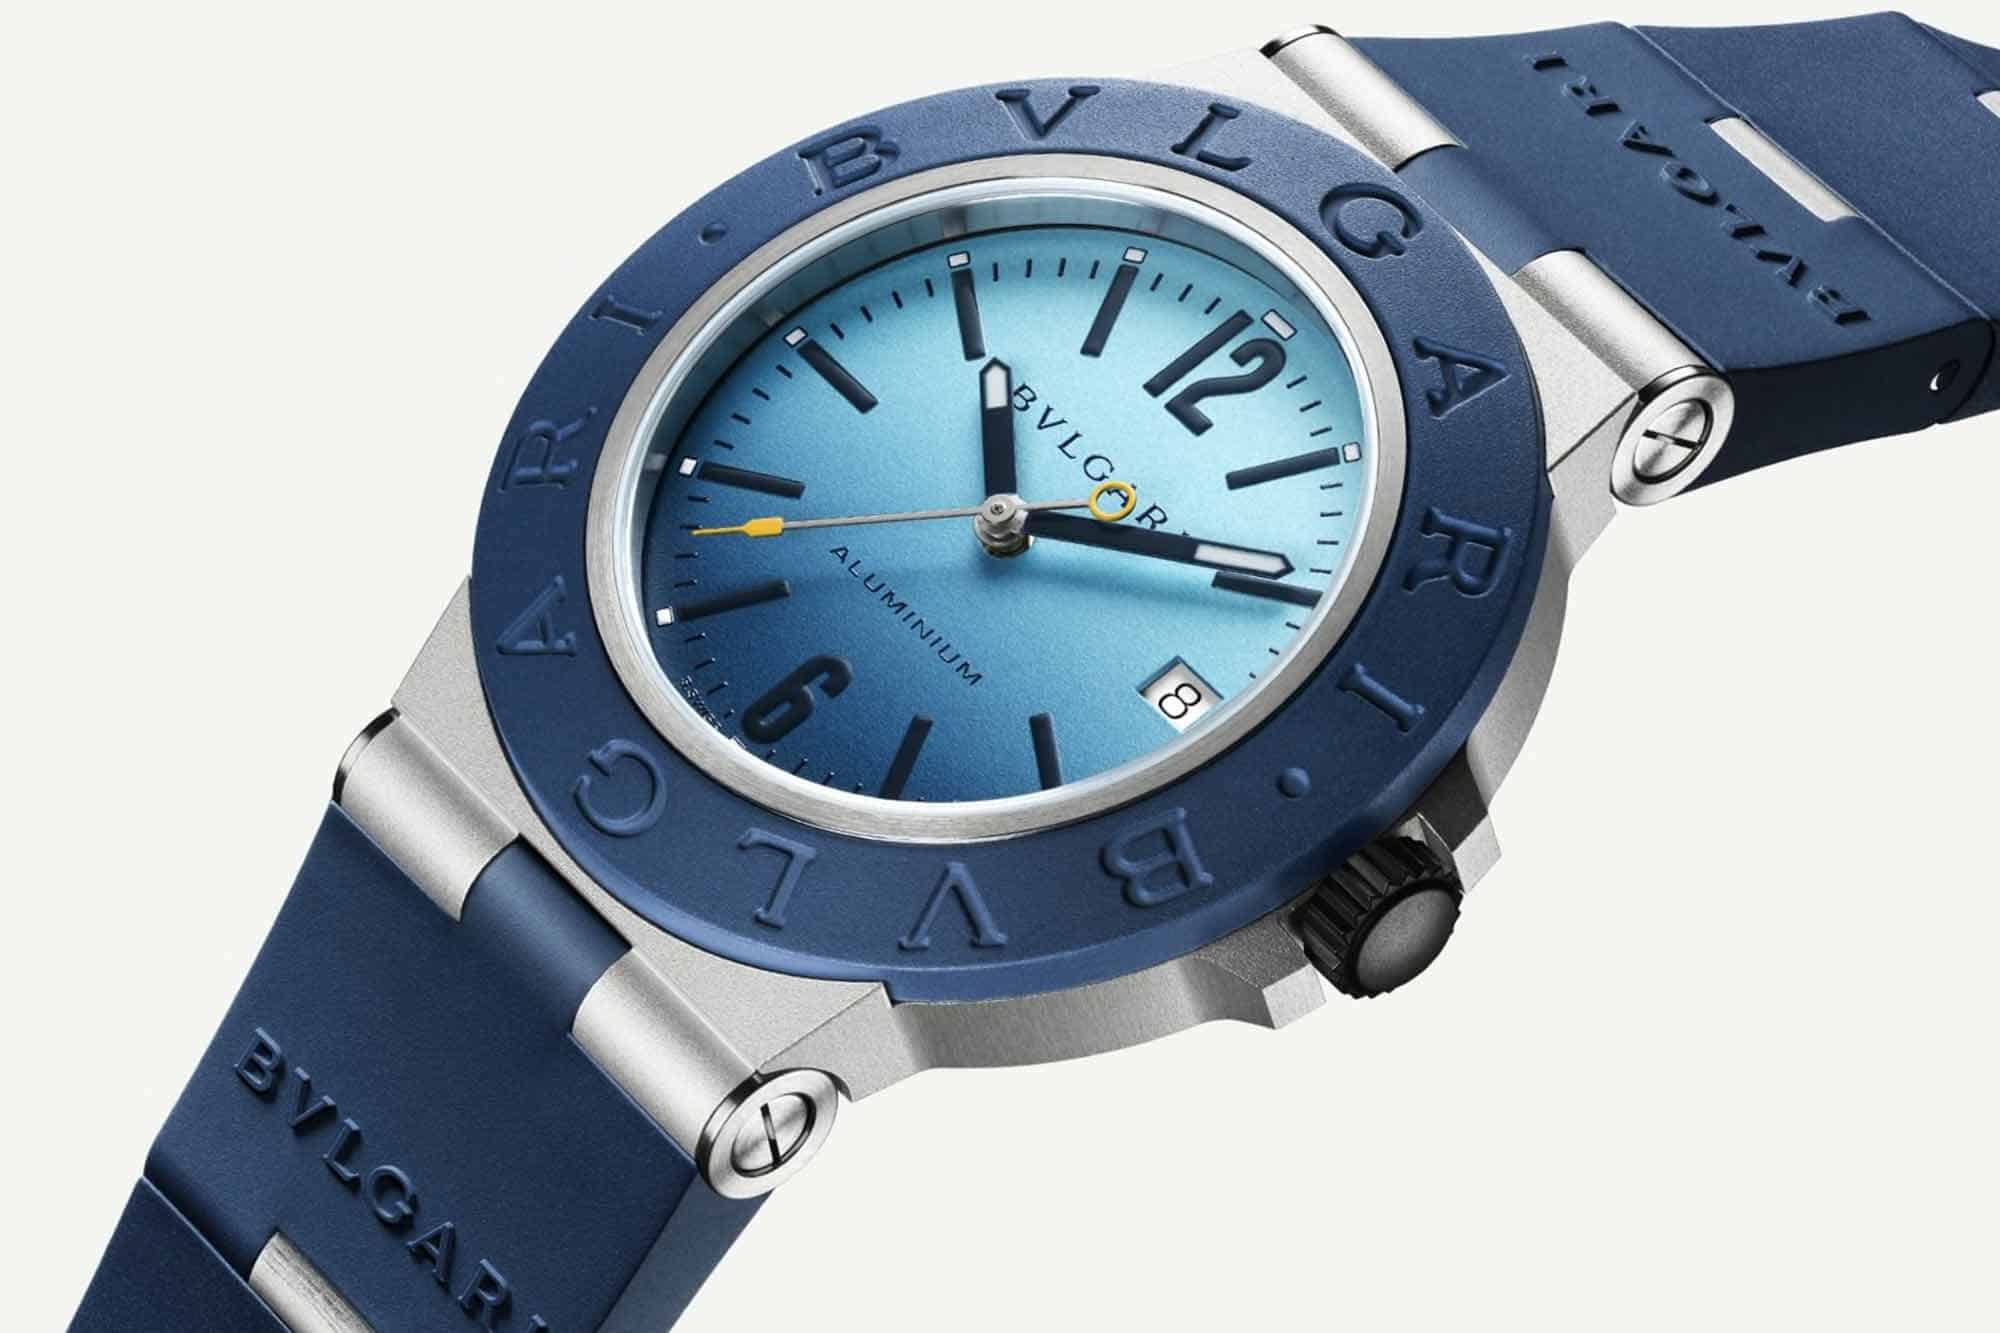 Bulgari is Ready for Summer with Beach Ready “Capri” Updates to their Aluminum Collection